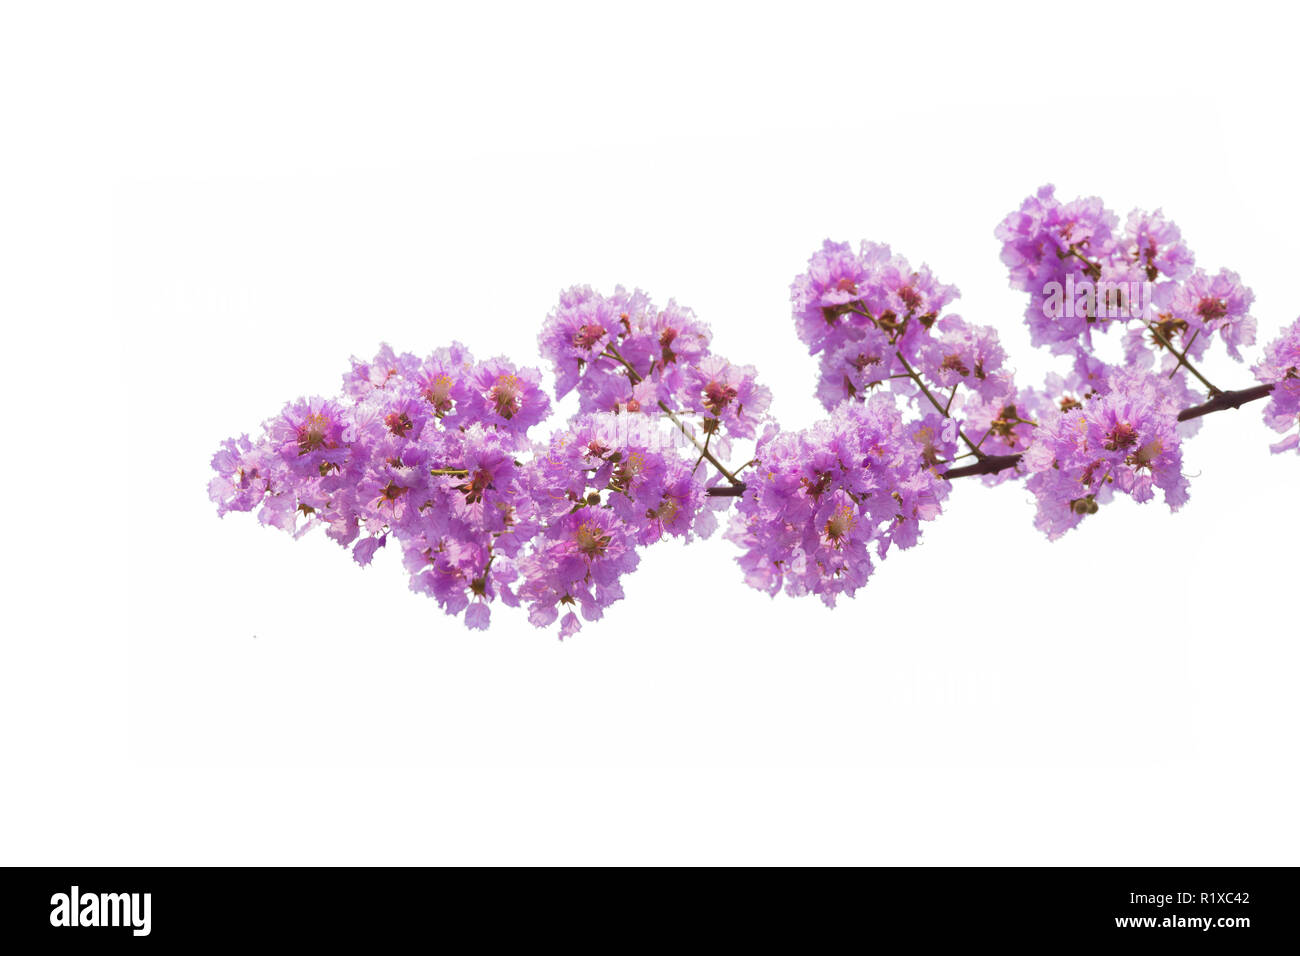 Lagerstroemia floribunda flower, also known as Thai crape myrtle and kedah bungor, is a species of flowering plant in the Lythraceae family. It is nat Stock Photo